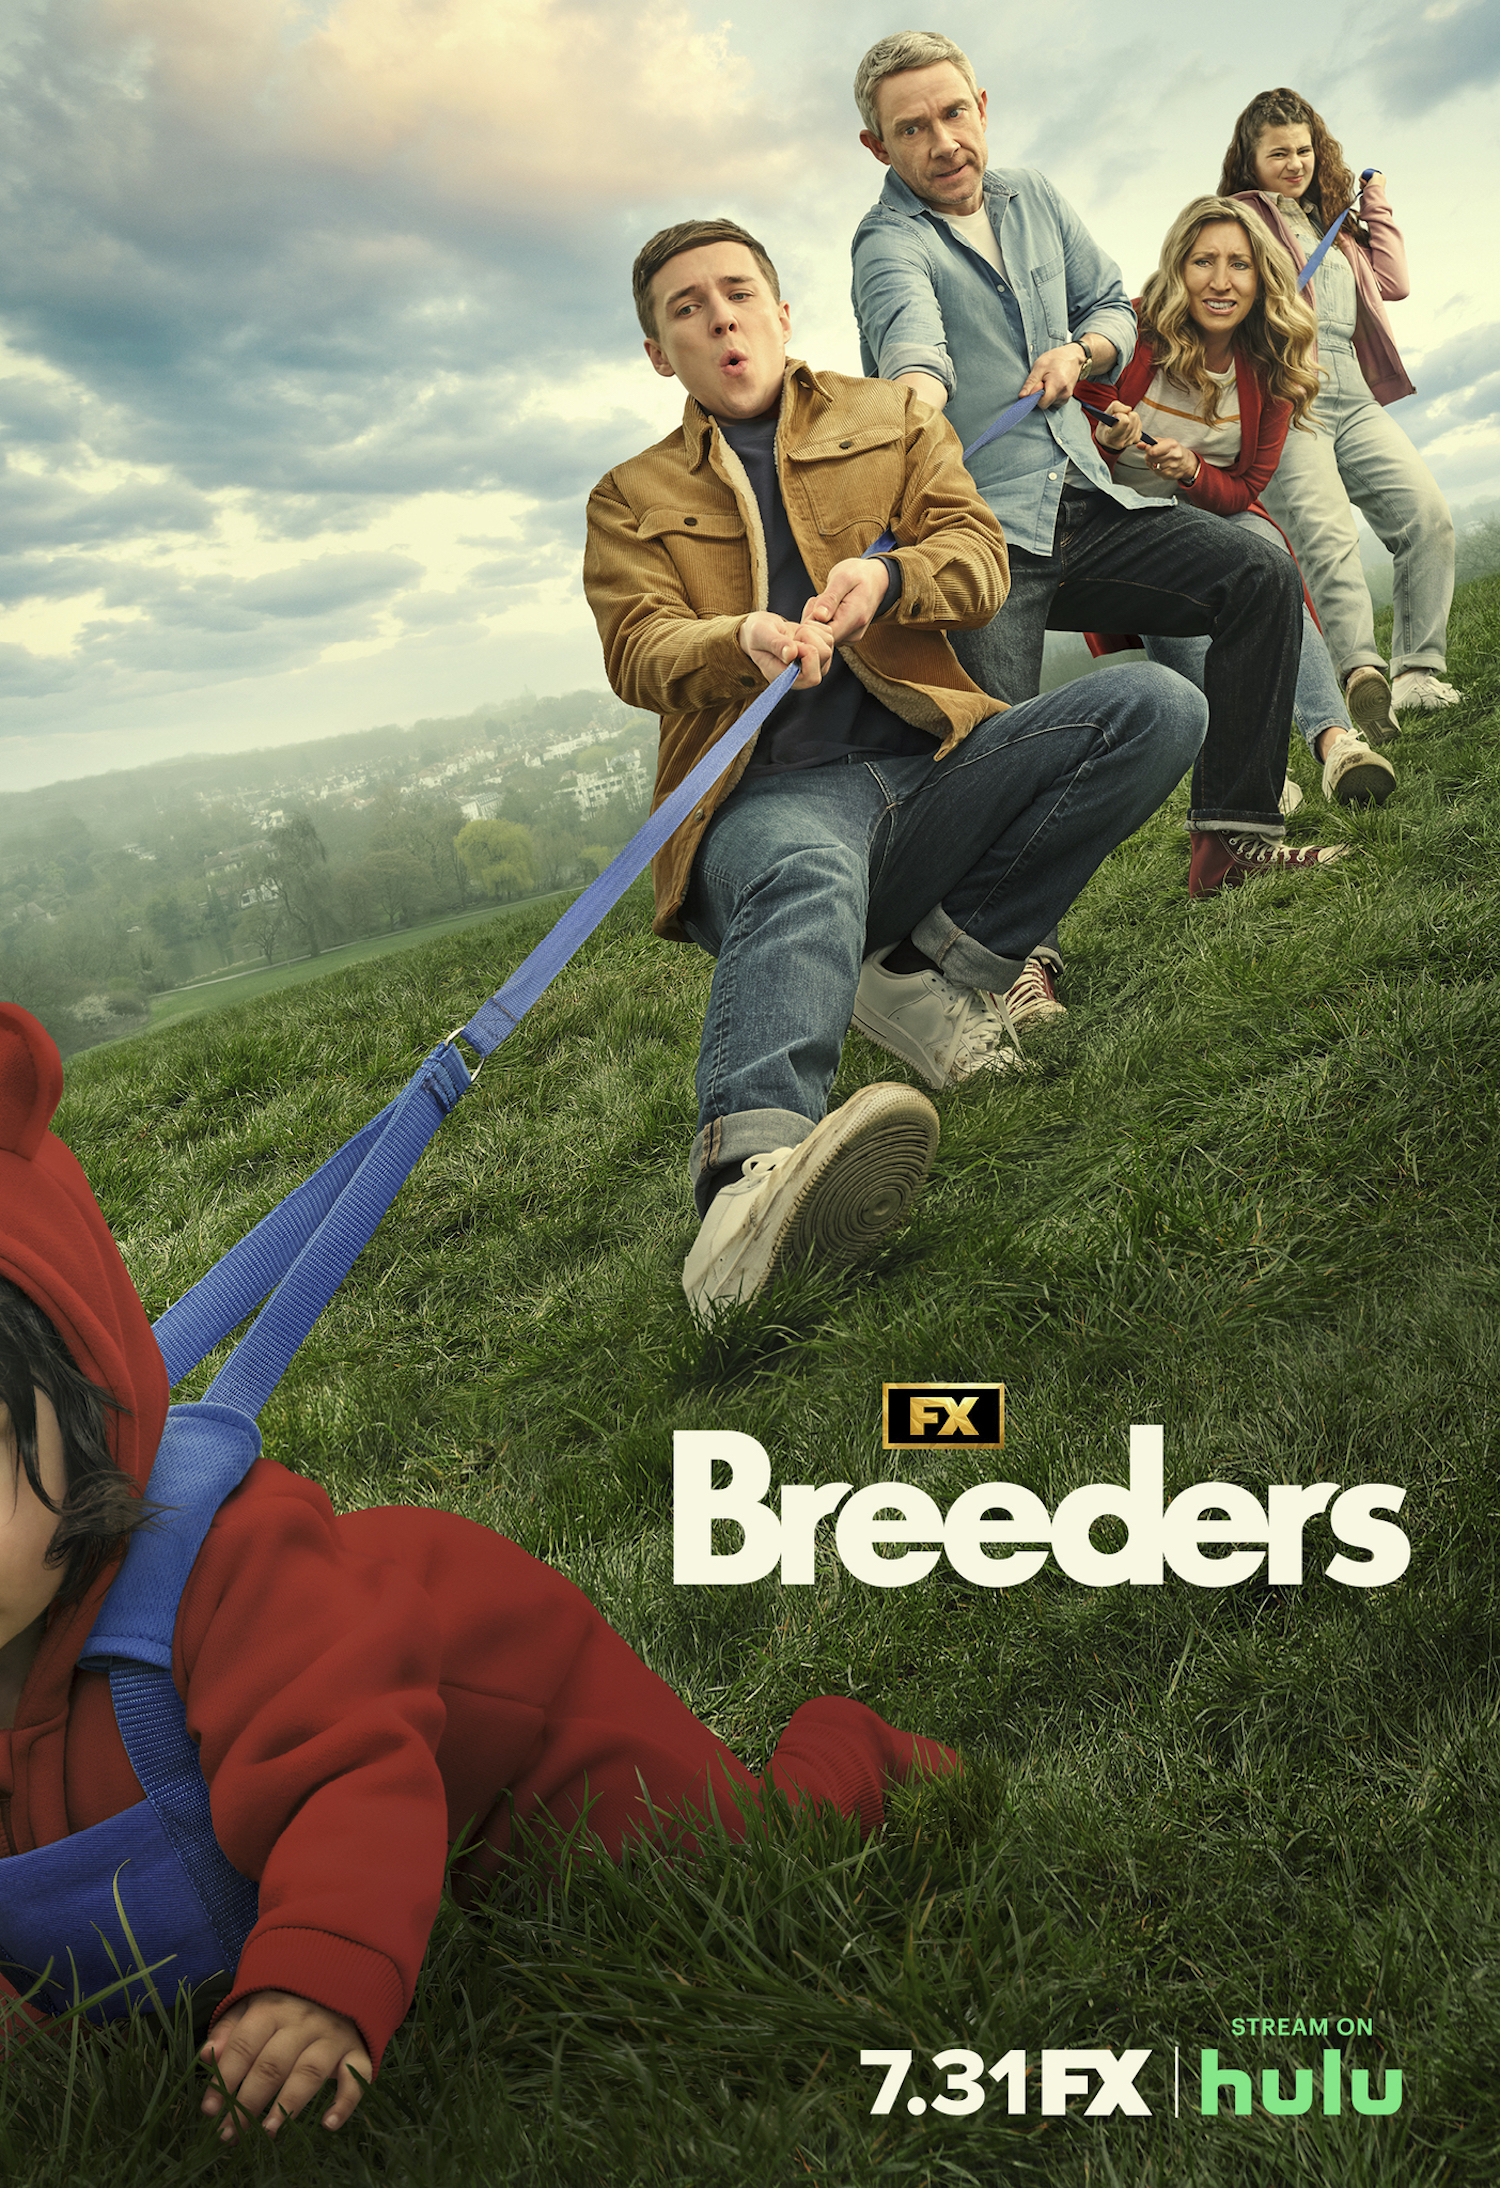 Breeders' to End With Season 4 — FX Teases 'Dramatic Conclusion'